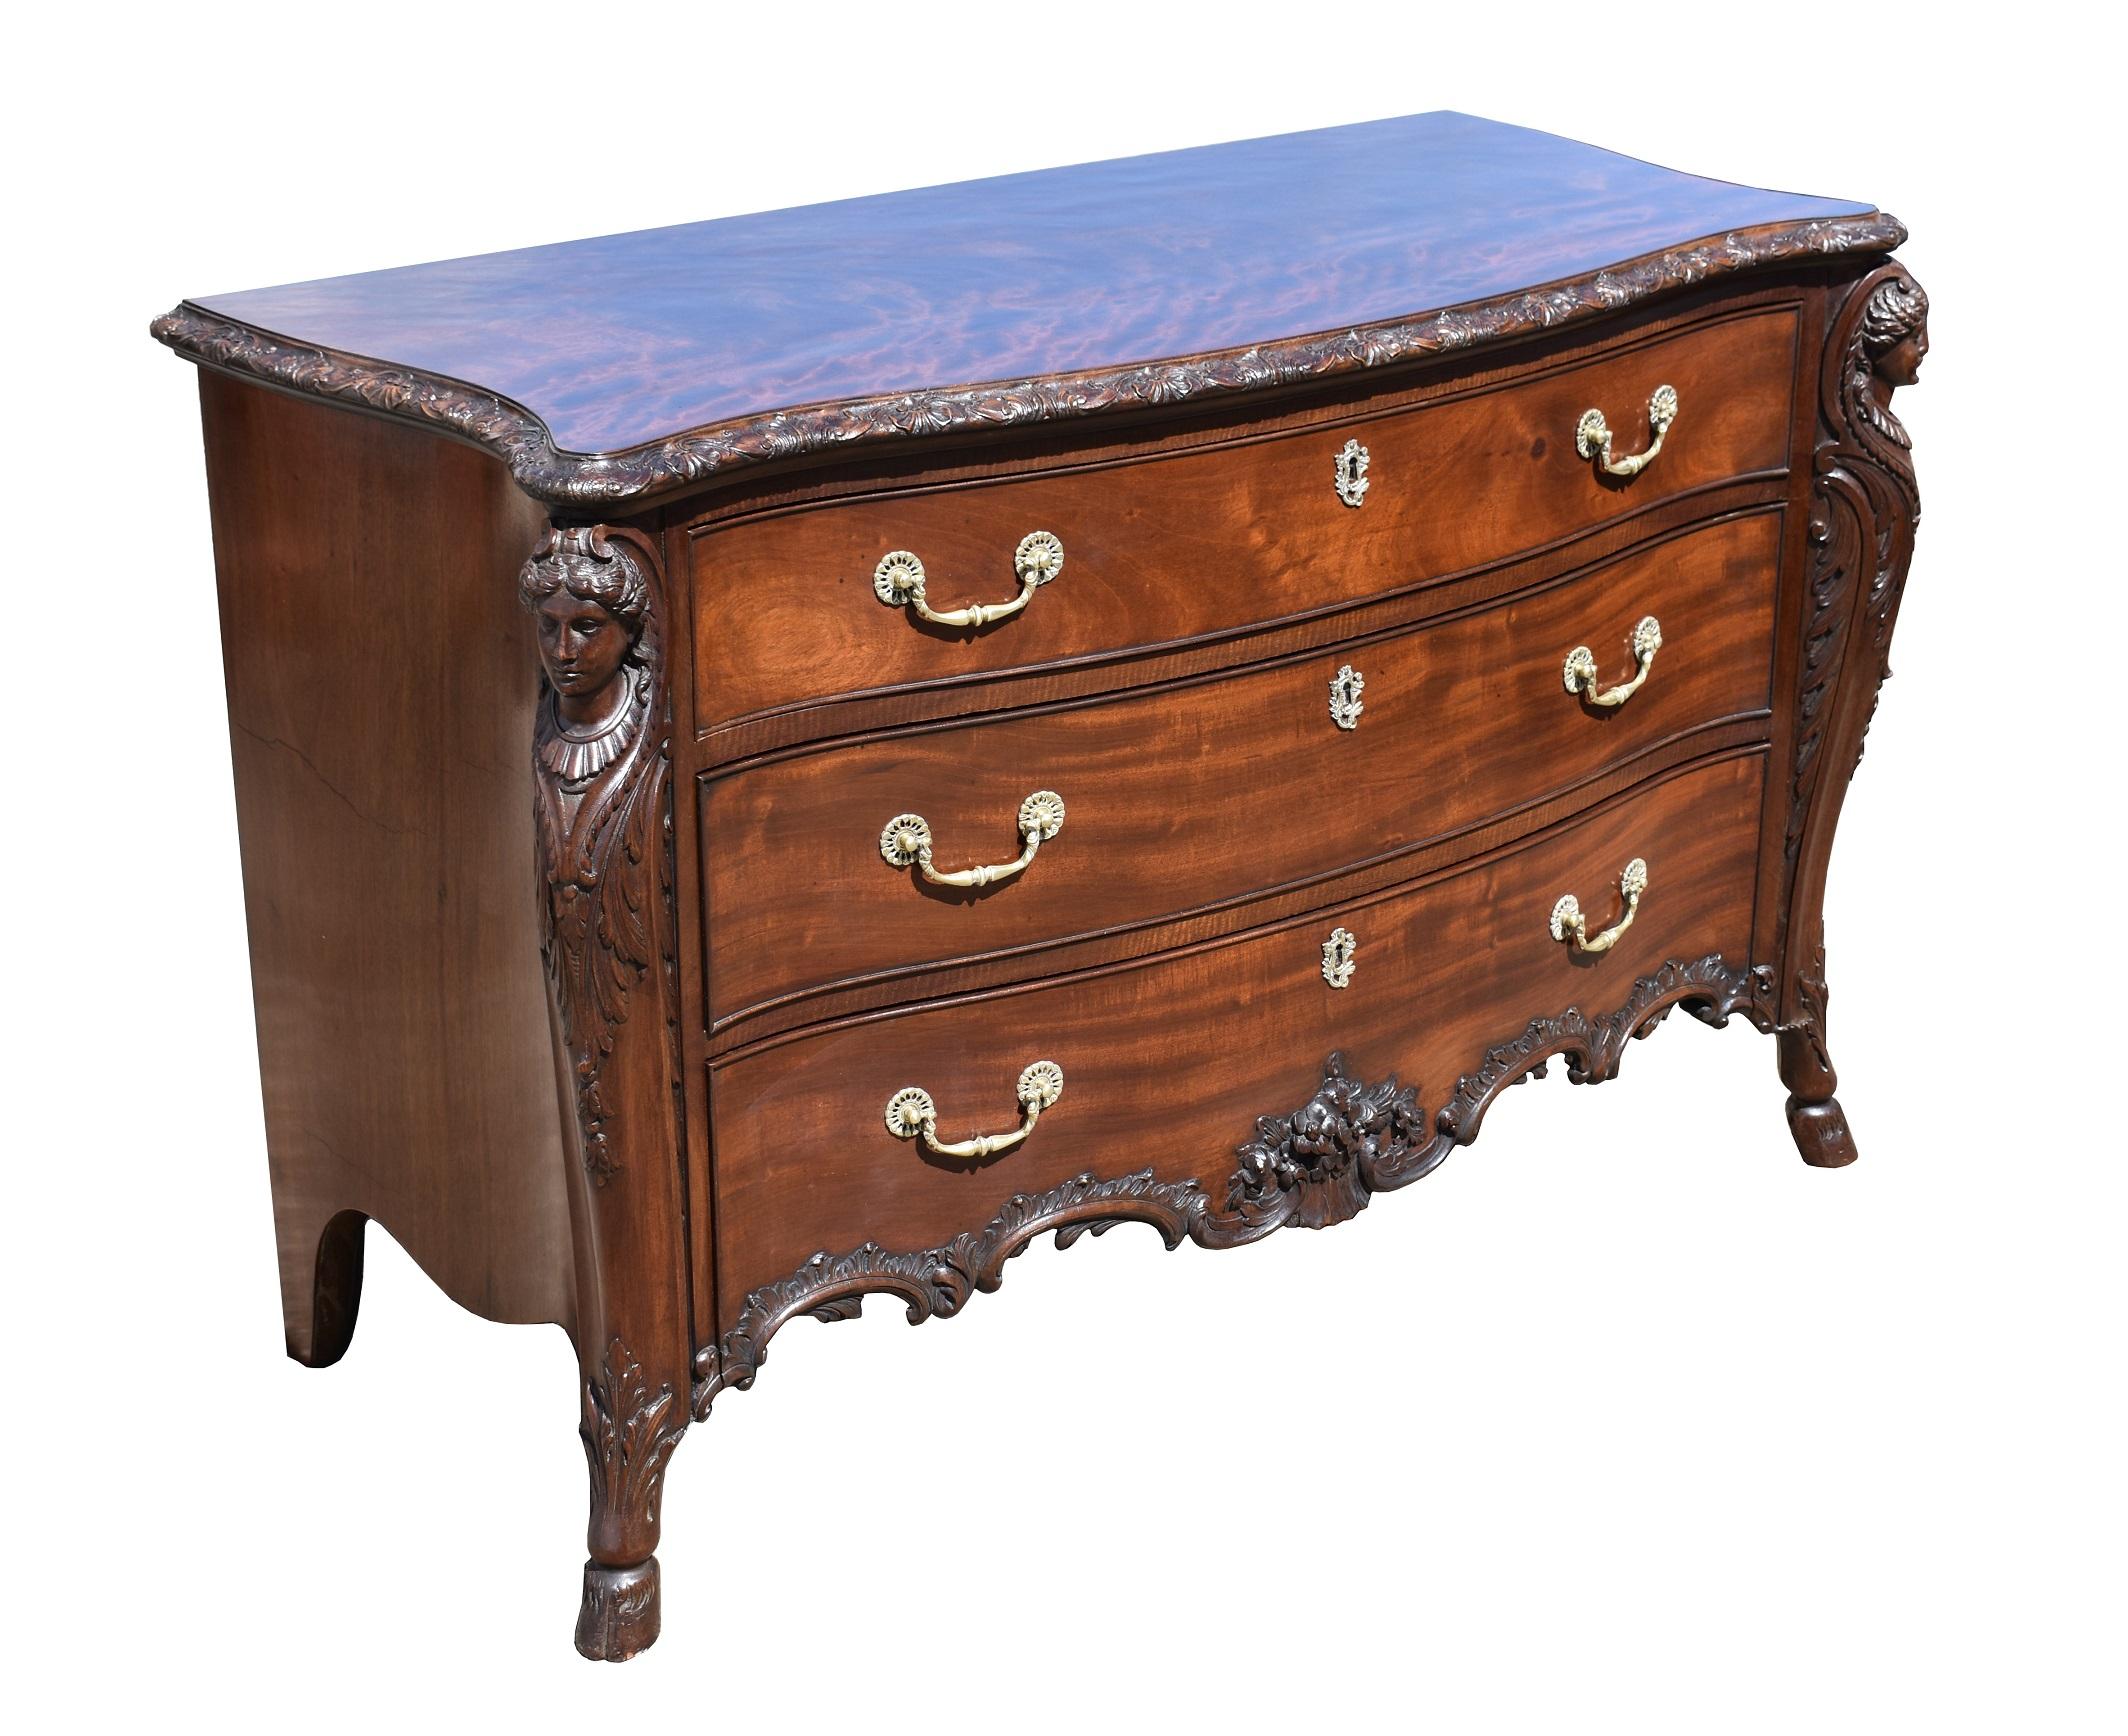 For sale is a fine example of a 19th century Victorian Chippendale style mahogany serpentine chest of drawers. Having a well figured top with a Rococo carved shell edge, with three graduated drawers below, each flanked by carved caryatids and